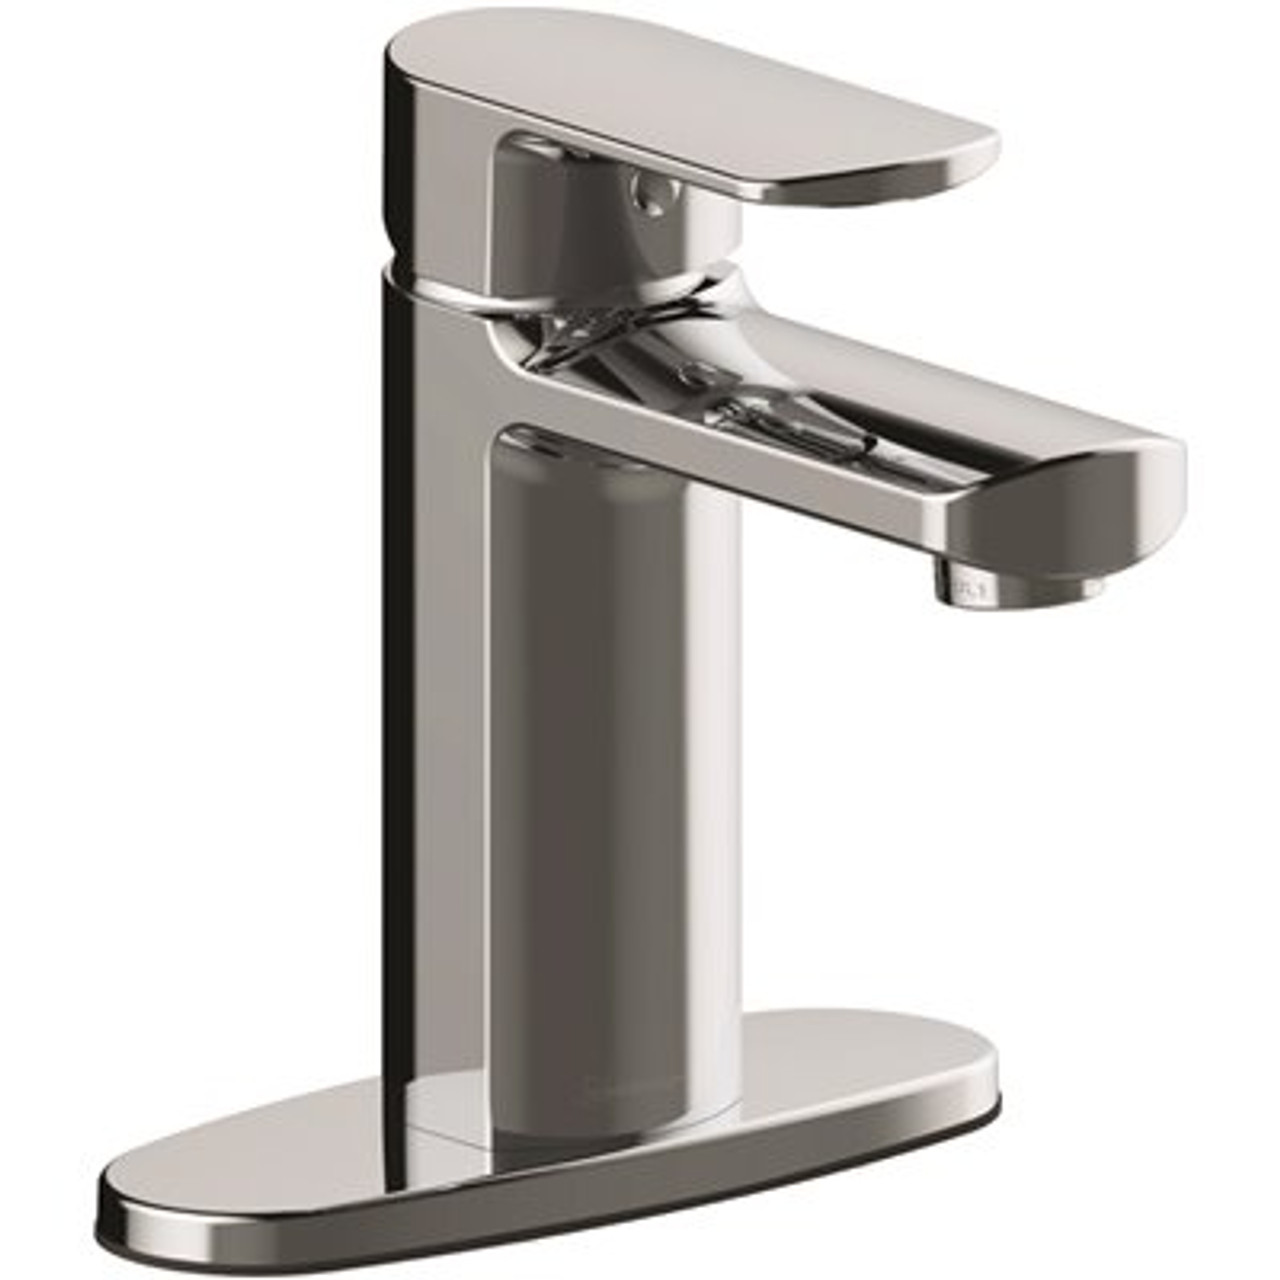 Westwind Single Hole Single-Handle Bathroom Faucet in Chrome with Quick Install Pop-Up